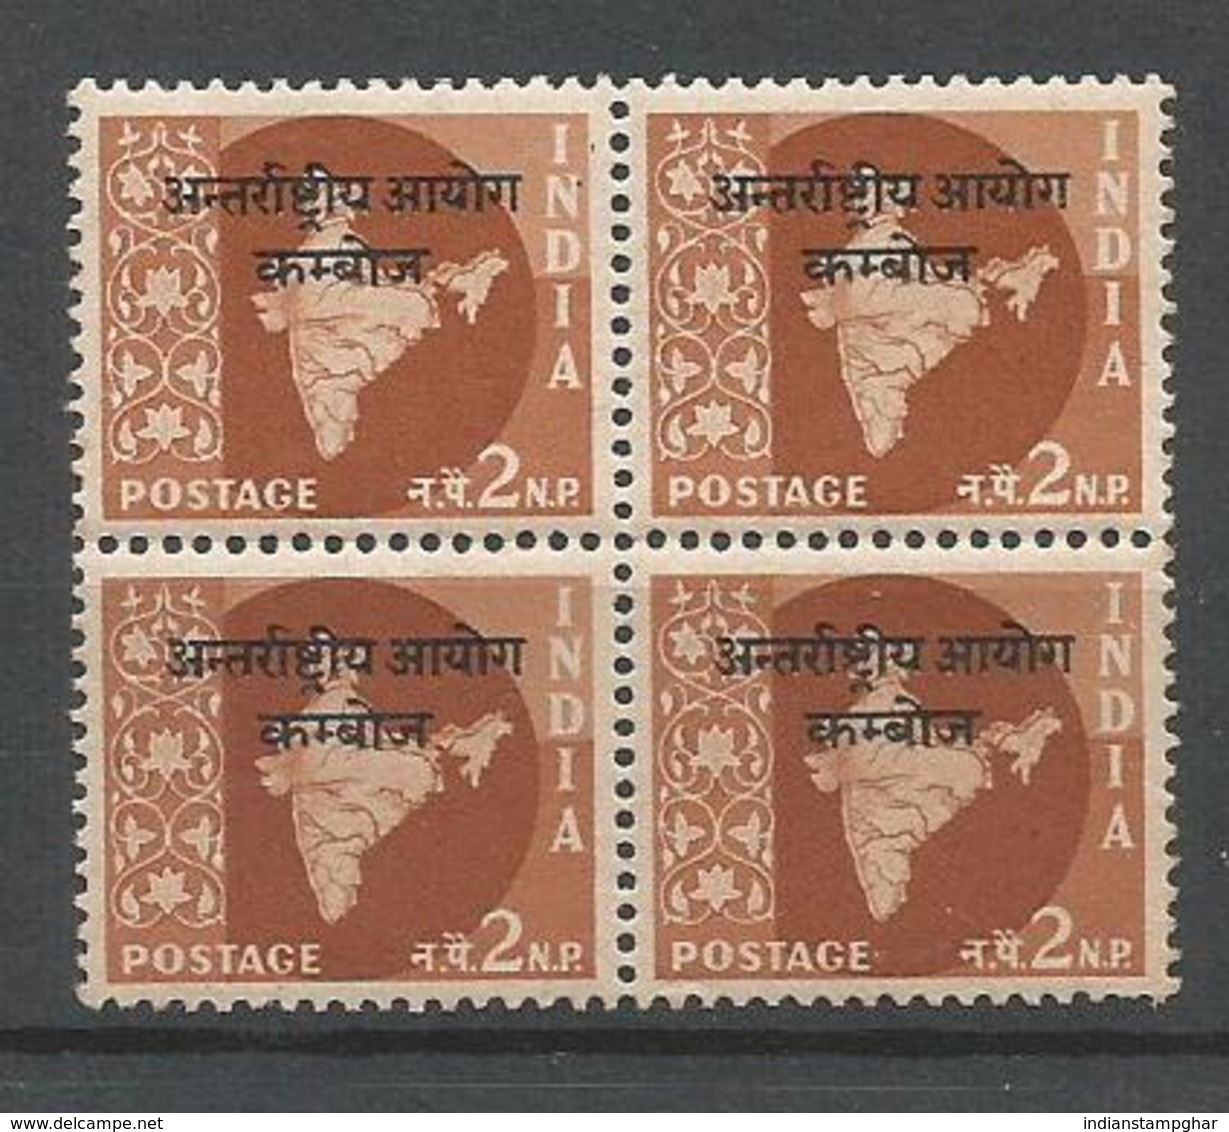 Cambodia Opvt. On 2np Map, Block Of 4, MNH 1962 Star Wmk, Military Stamps, As Per Scan - Militärpostmarken